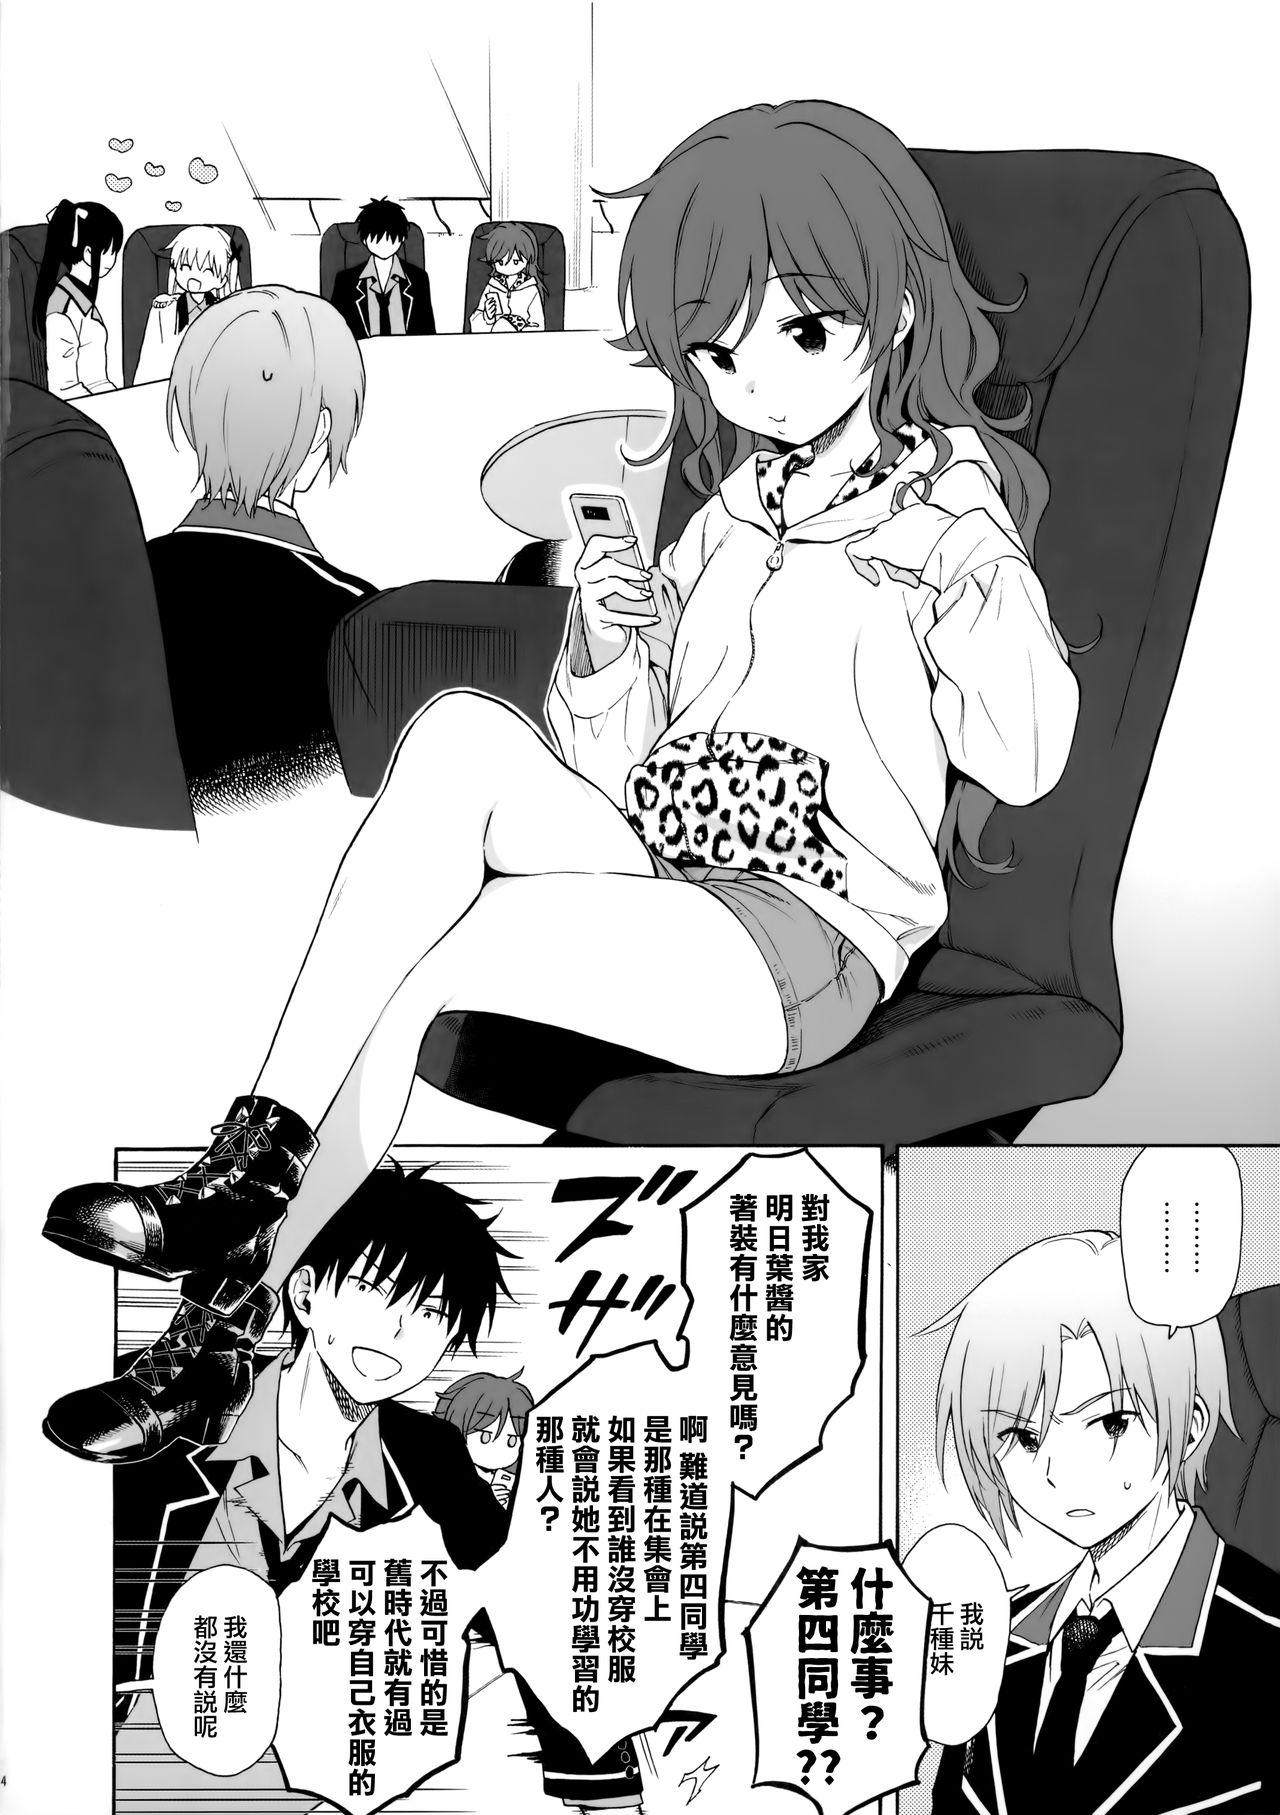 Amature Allure Imouto Manual - Qualidea code Gay Outdoors - Page 4